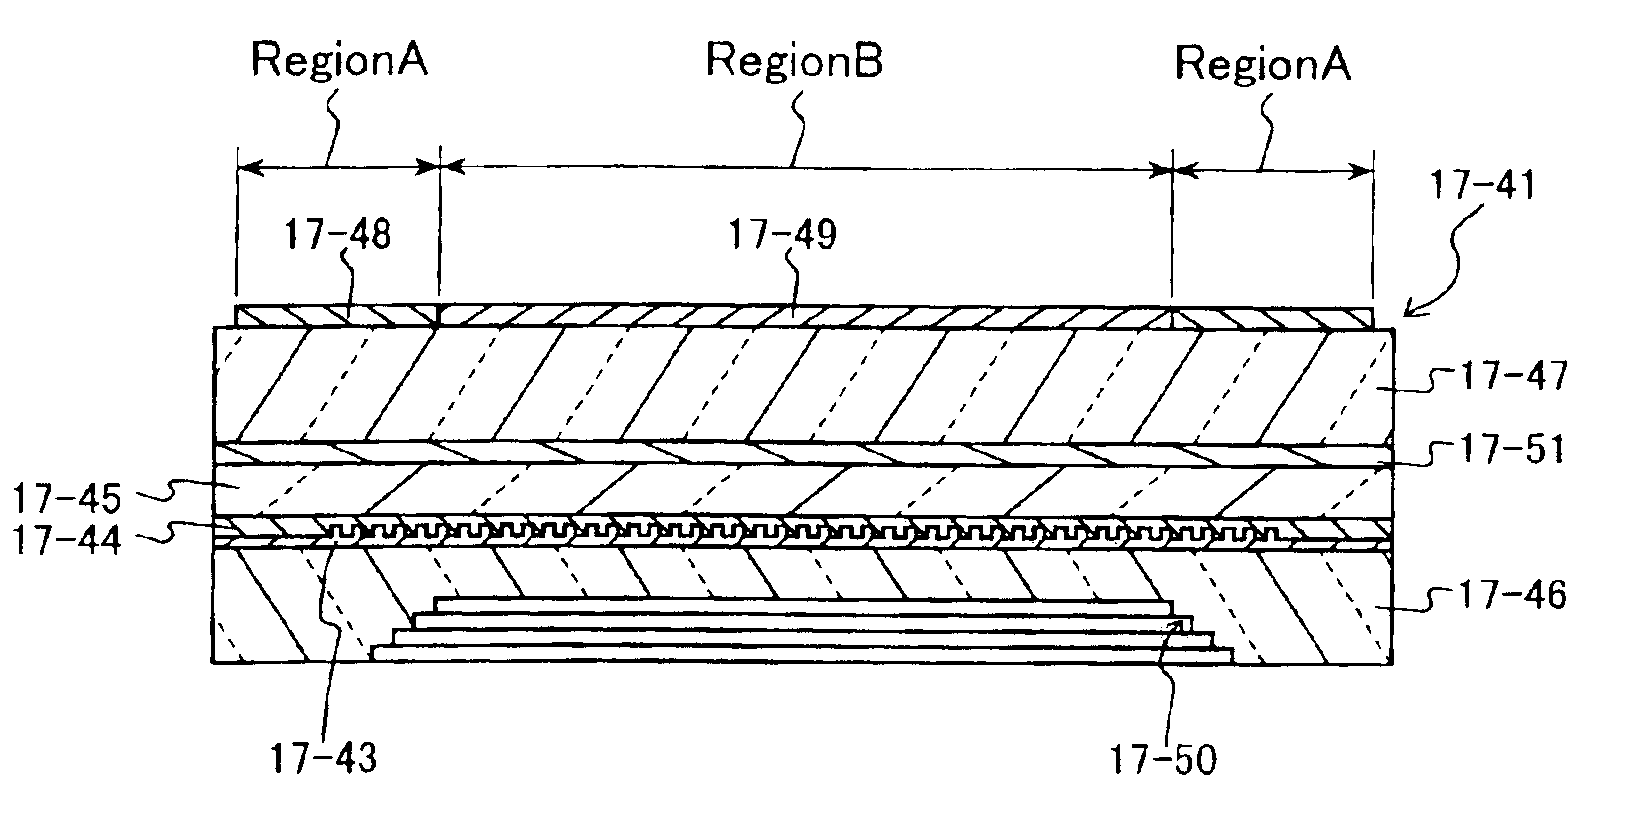 Optical information processor and optical element